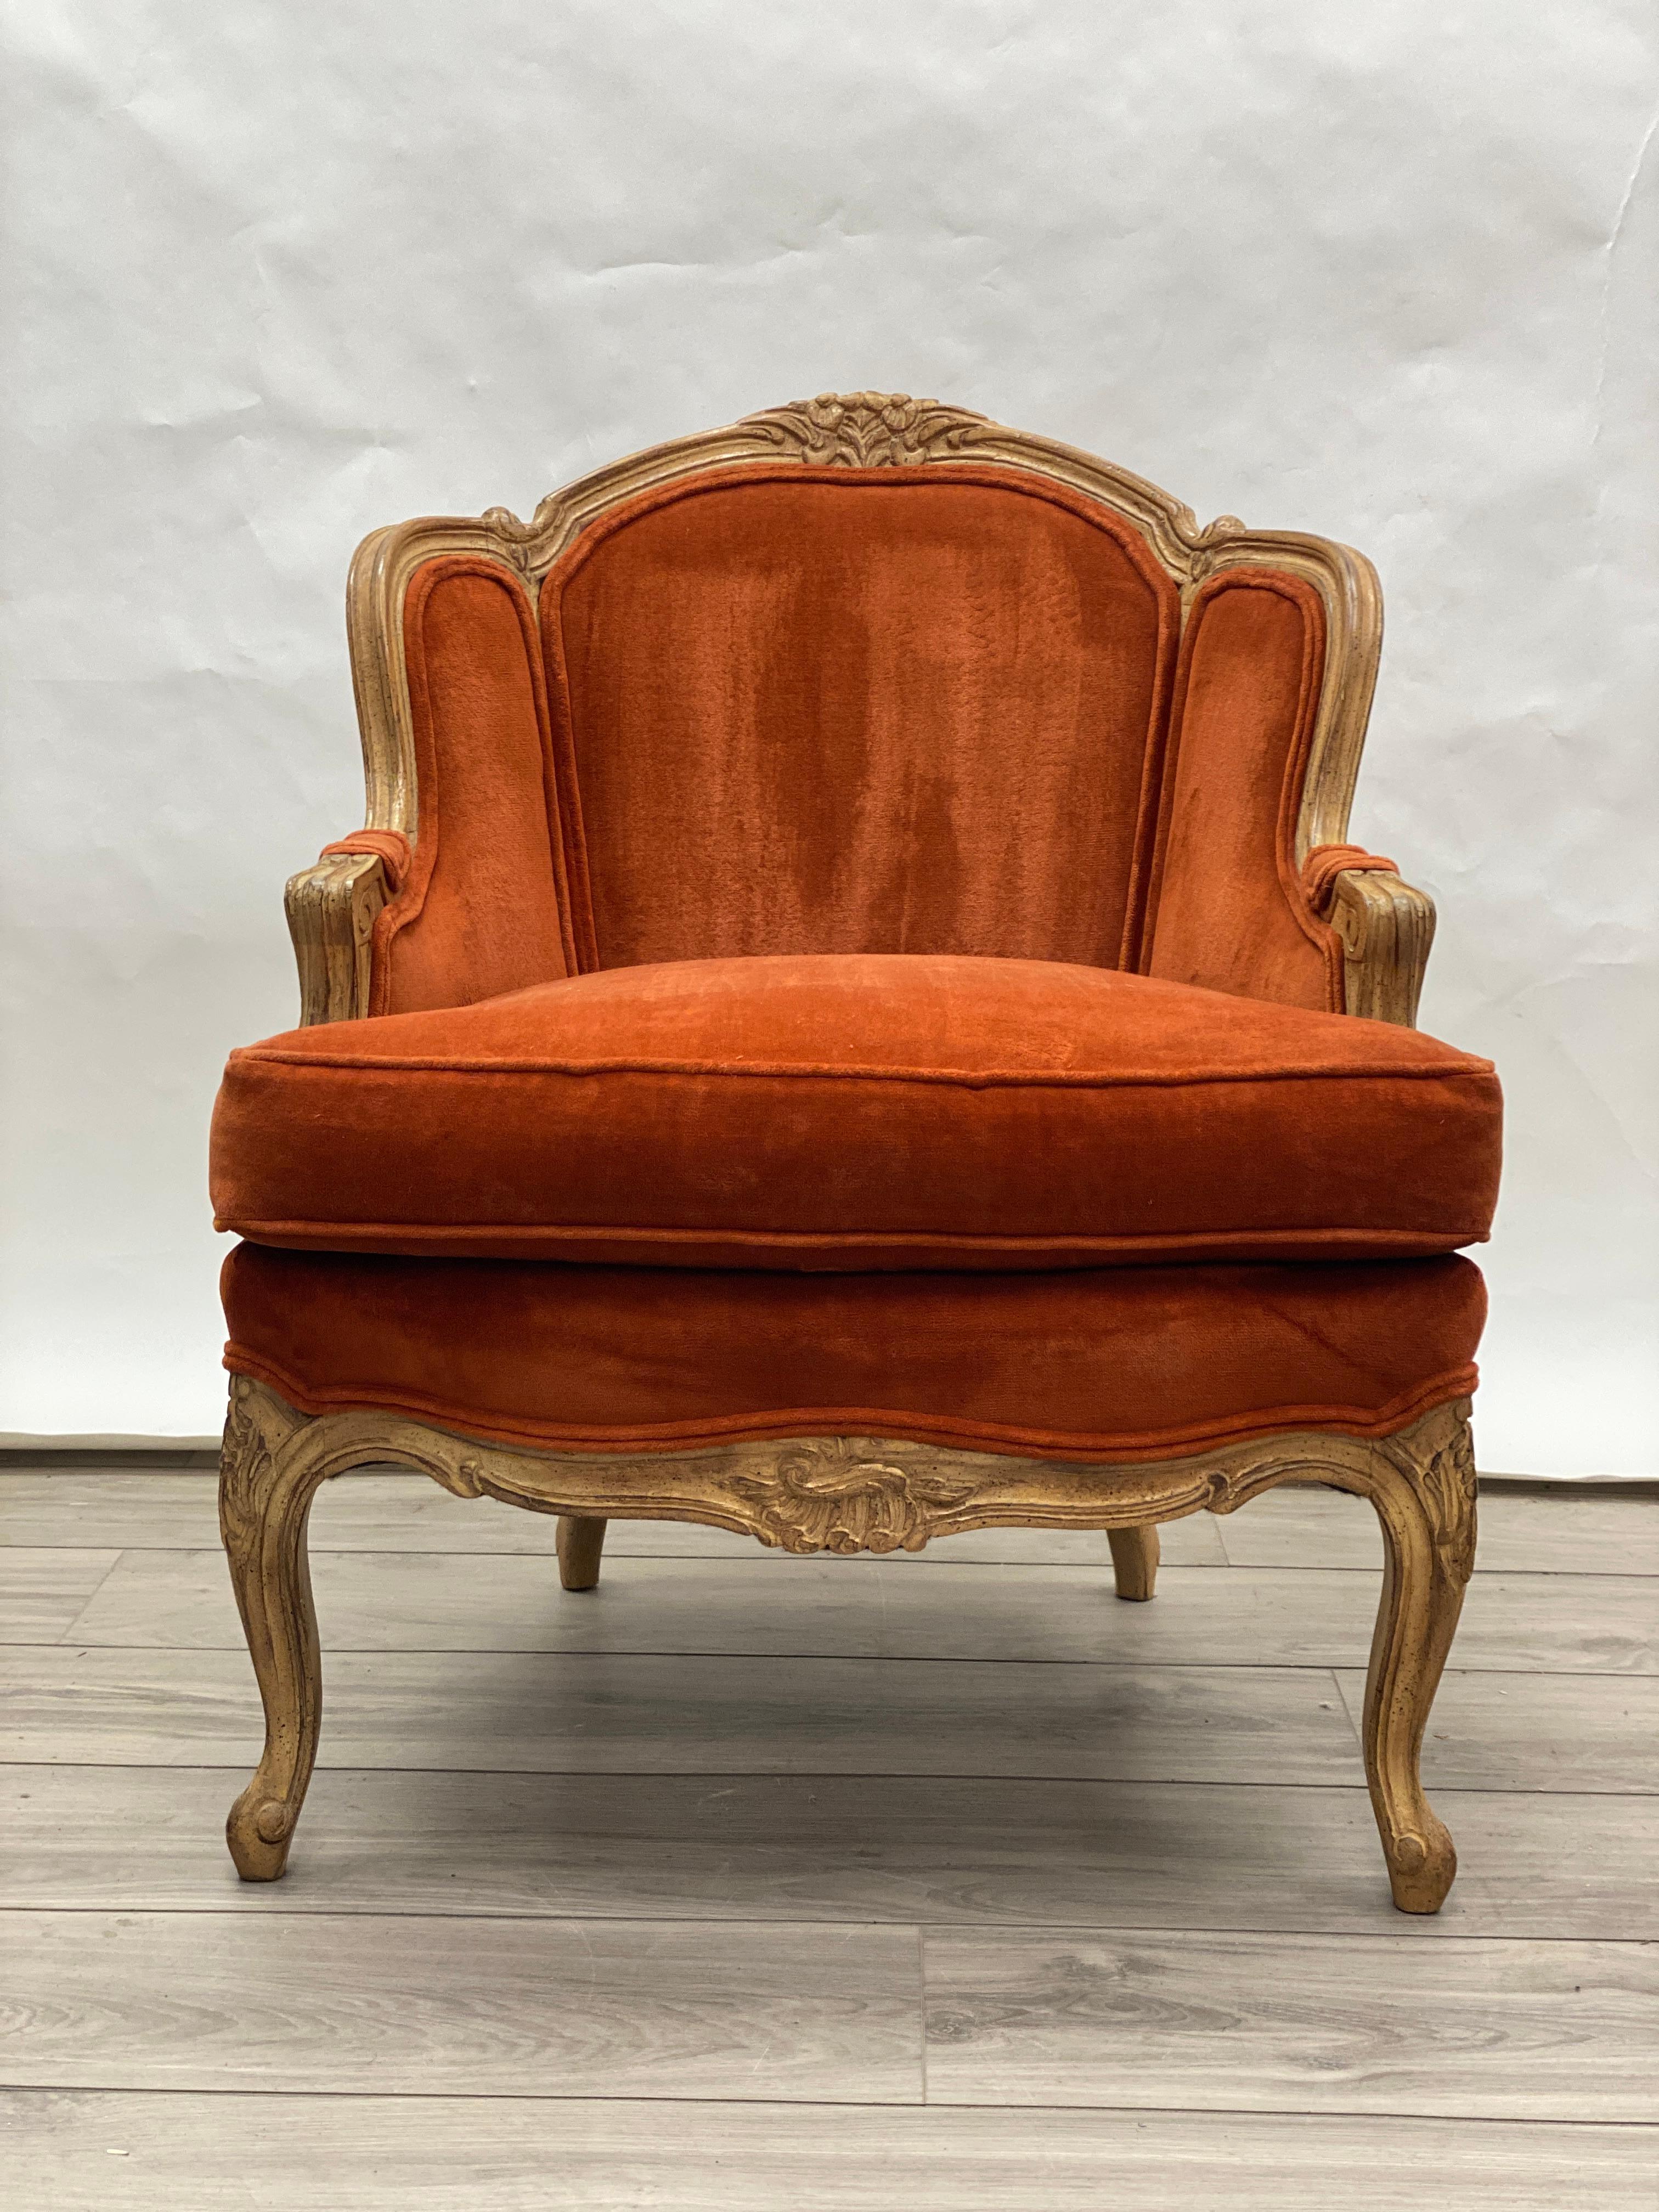 This is a late 20th Centurery Jeffco Manufacturing Louis XV French Provincial style bergere chair. The hand-carved frame is made of oak. It has a distressed glazed oak wood finish. The arms are and back rail are reeded. There is a central foliate